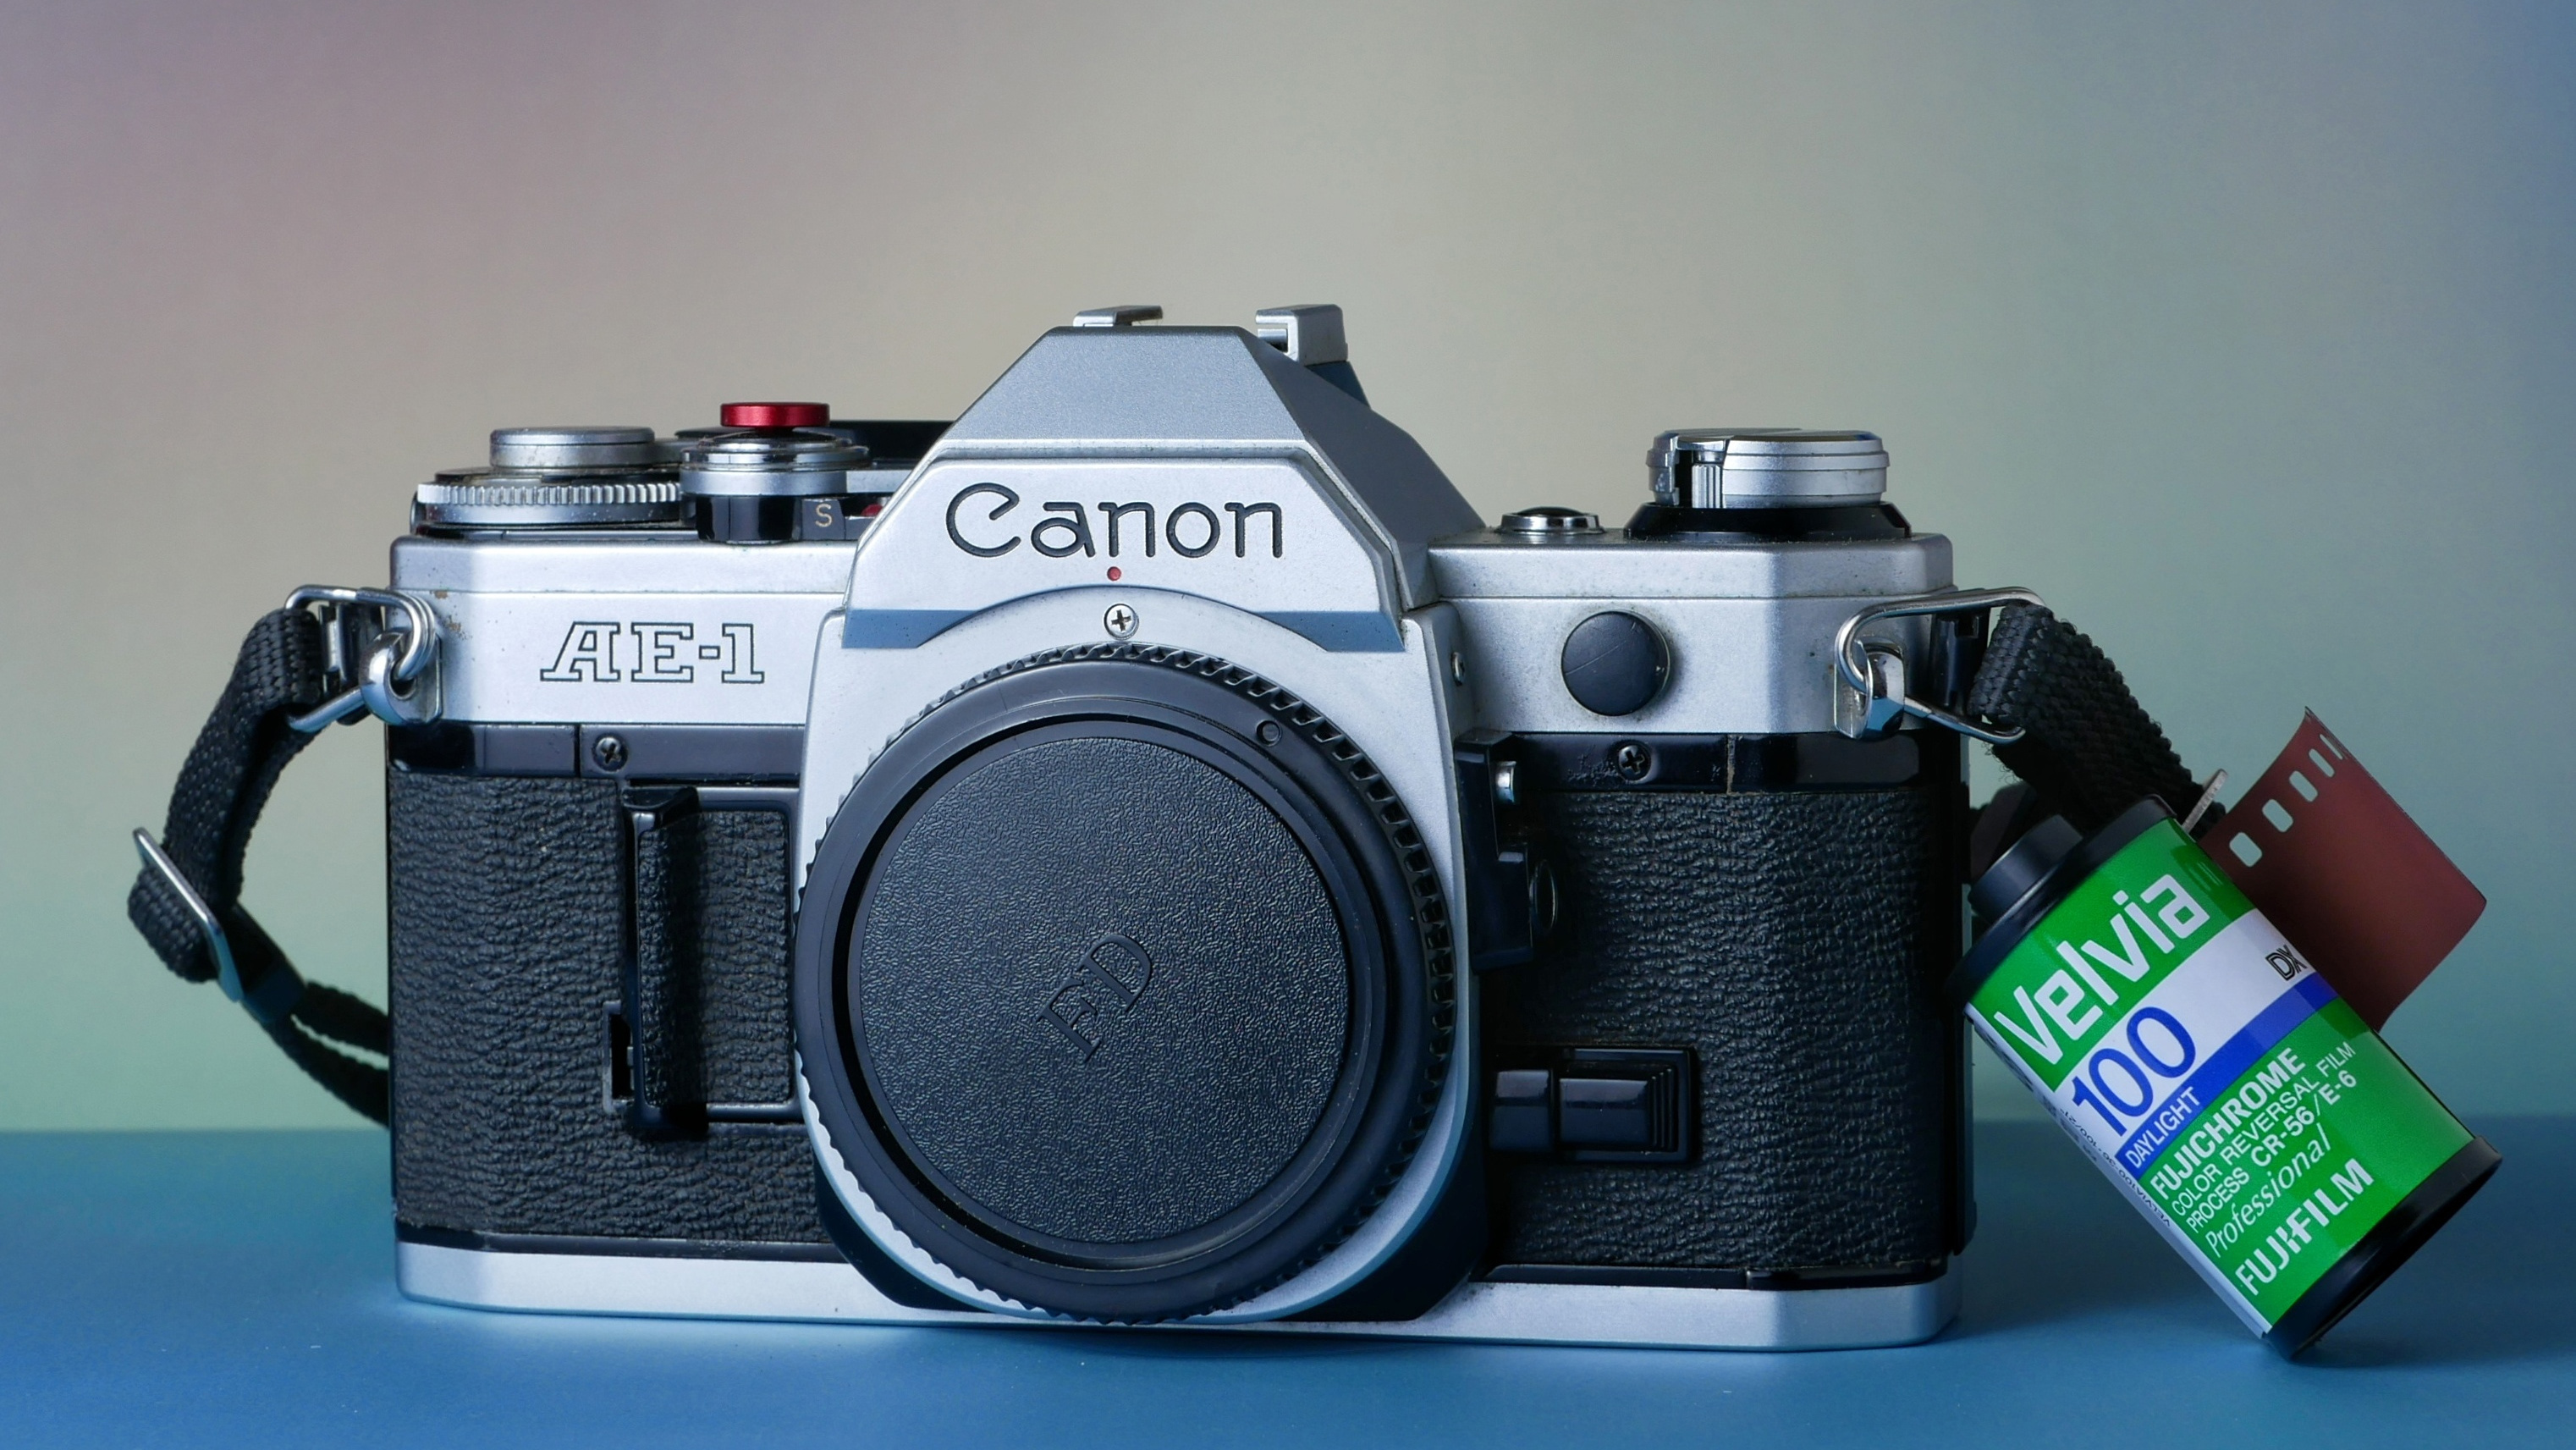 Canon hints at retro-style EOS R mirrorless camera – here's what we'd like  to see